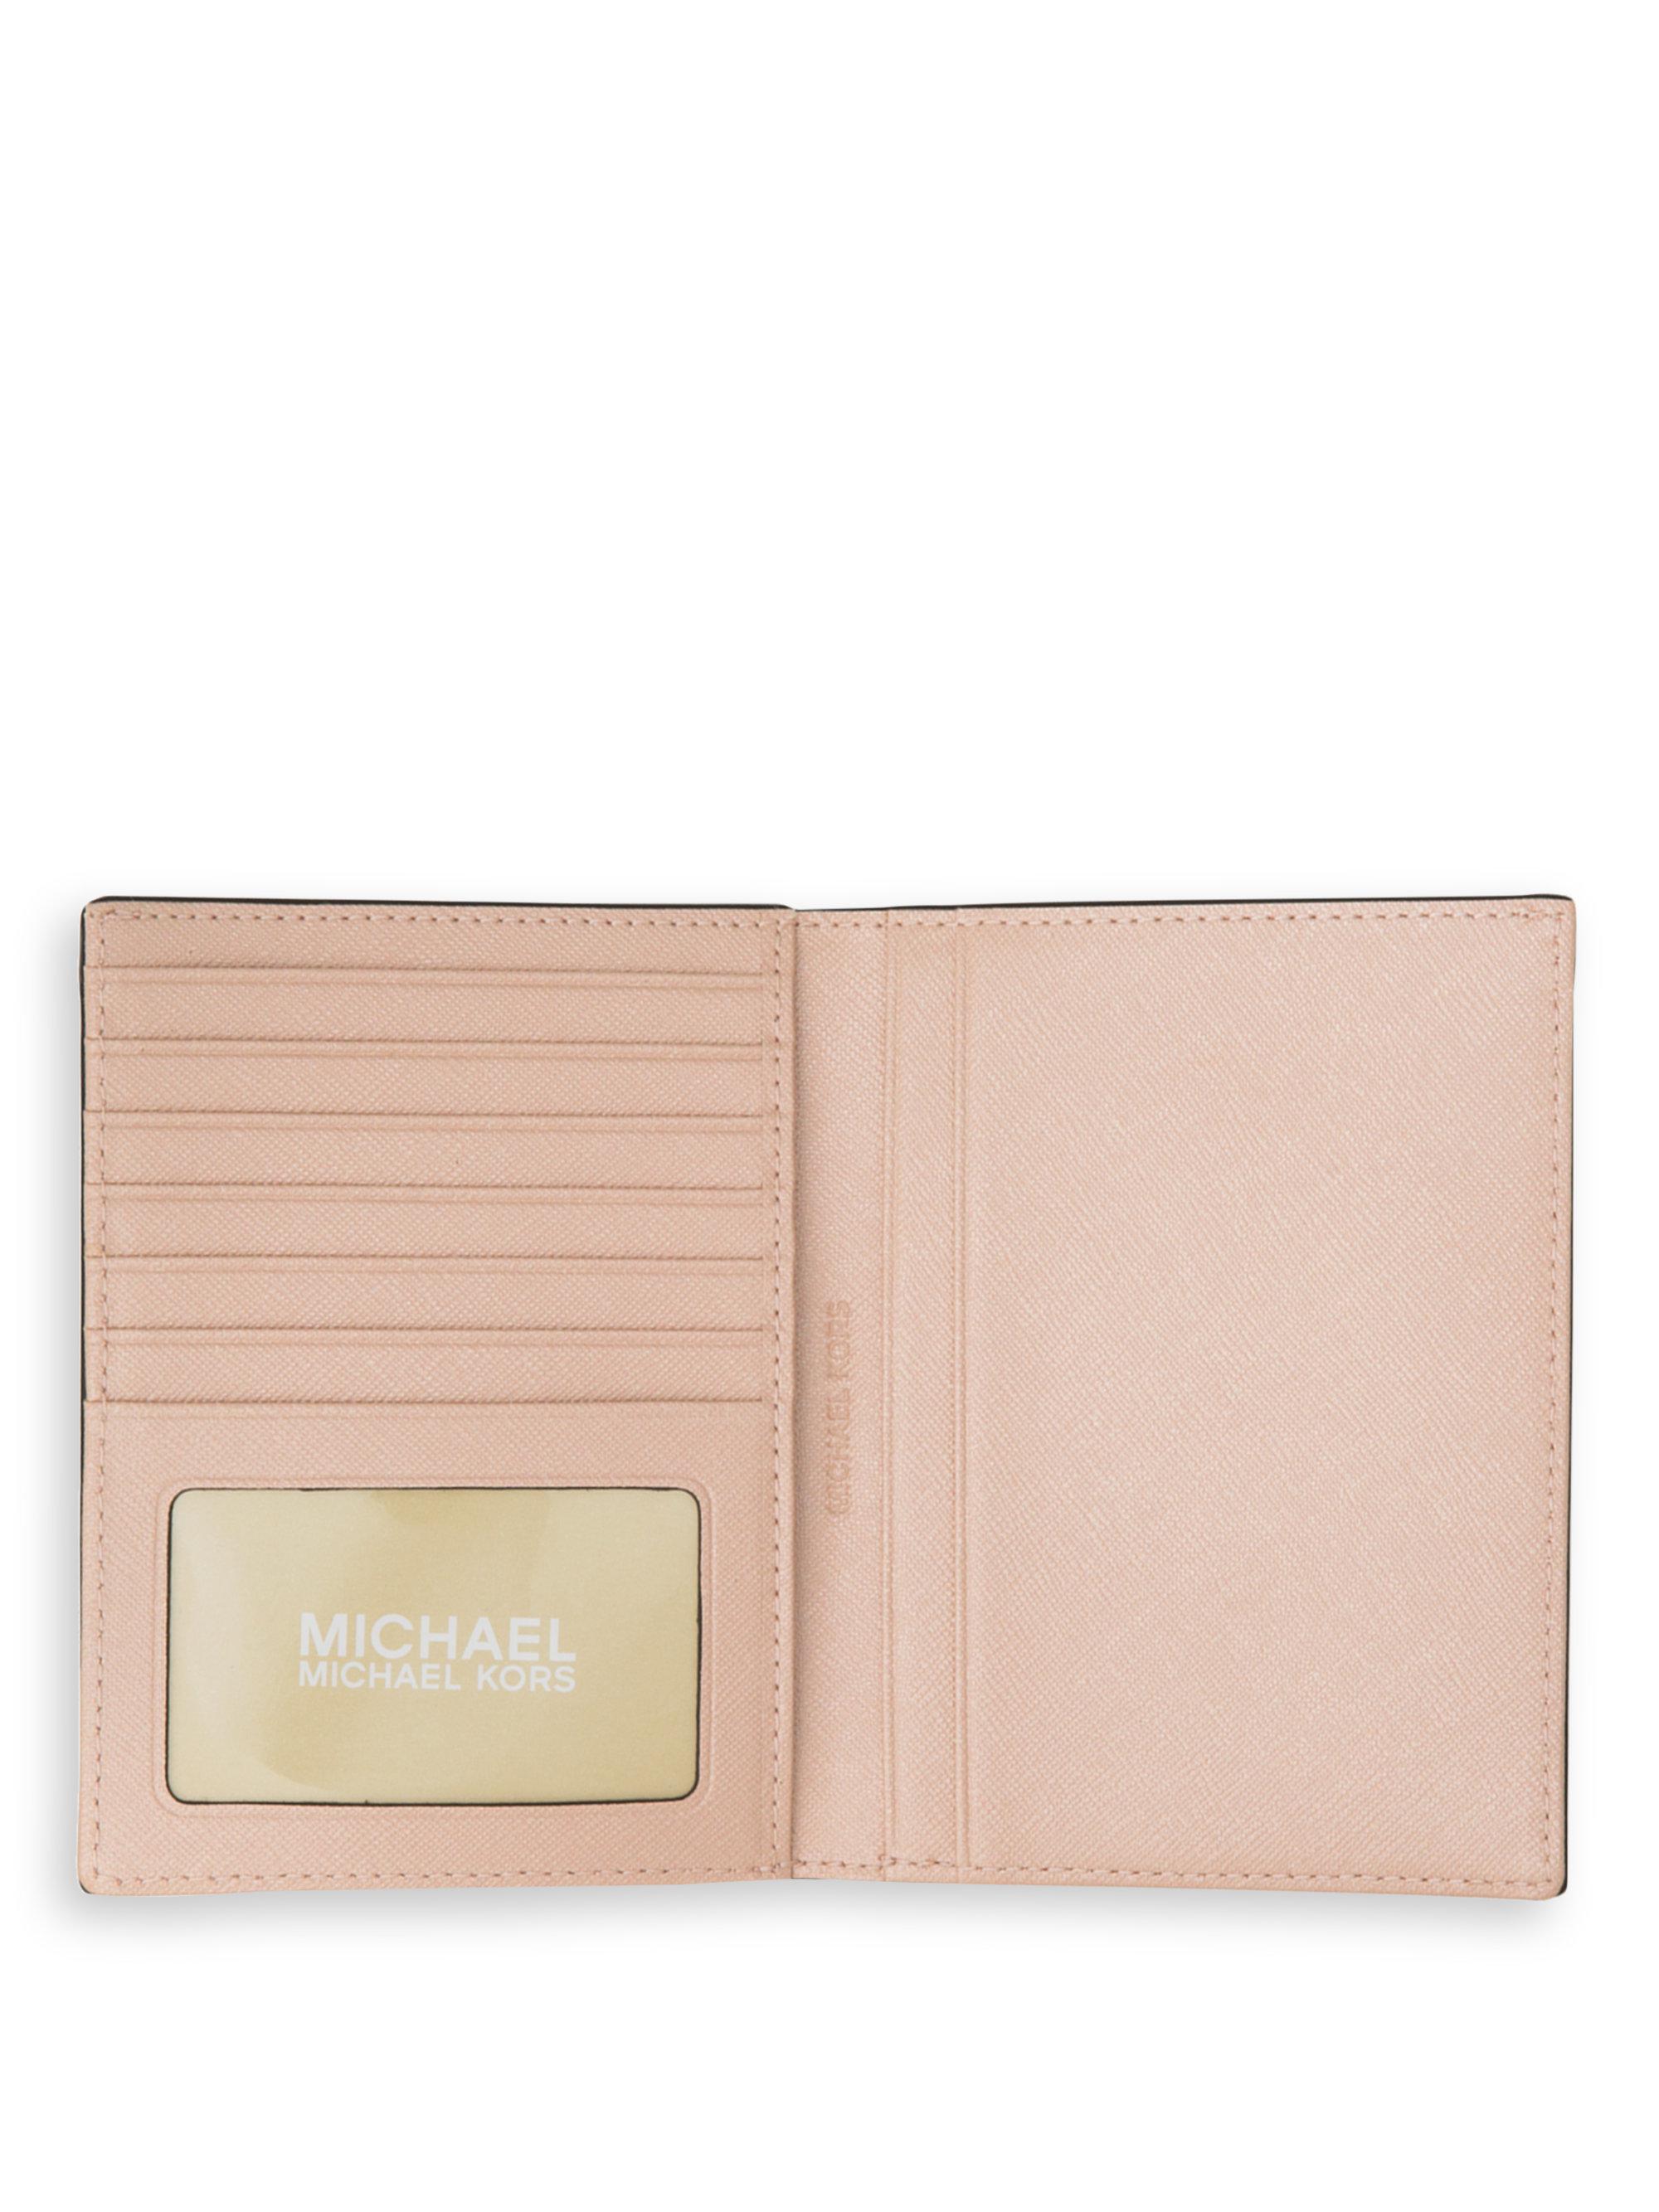 MICHAEL Michael Kors Leather Passport Holder in Pewter (Pink) - Lyst